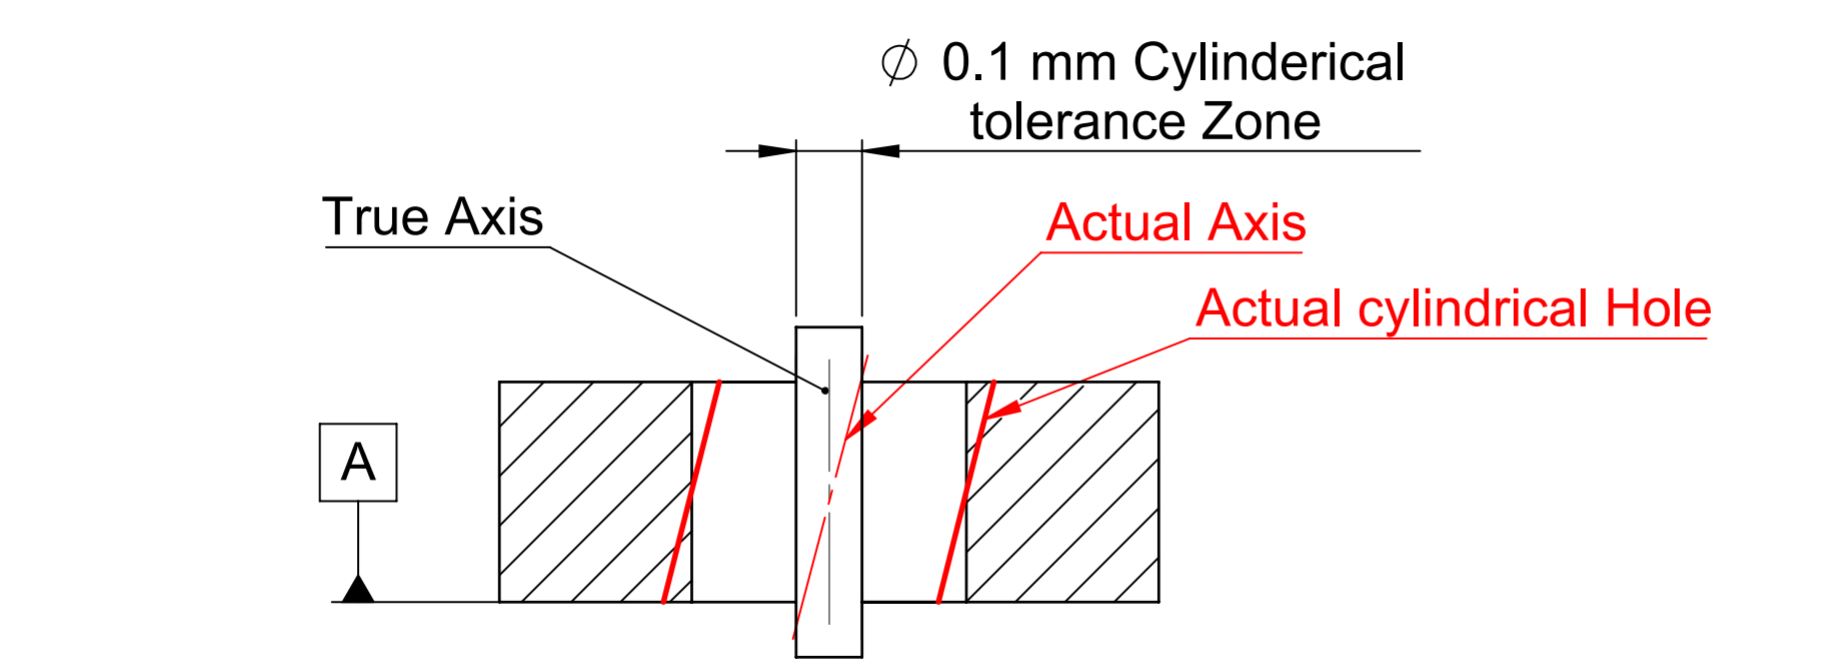 This image shows the tolerance zone created by gd&t perpendicularity tolerance on an axis.